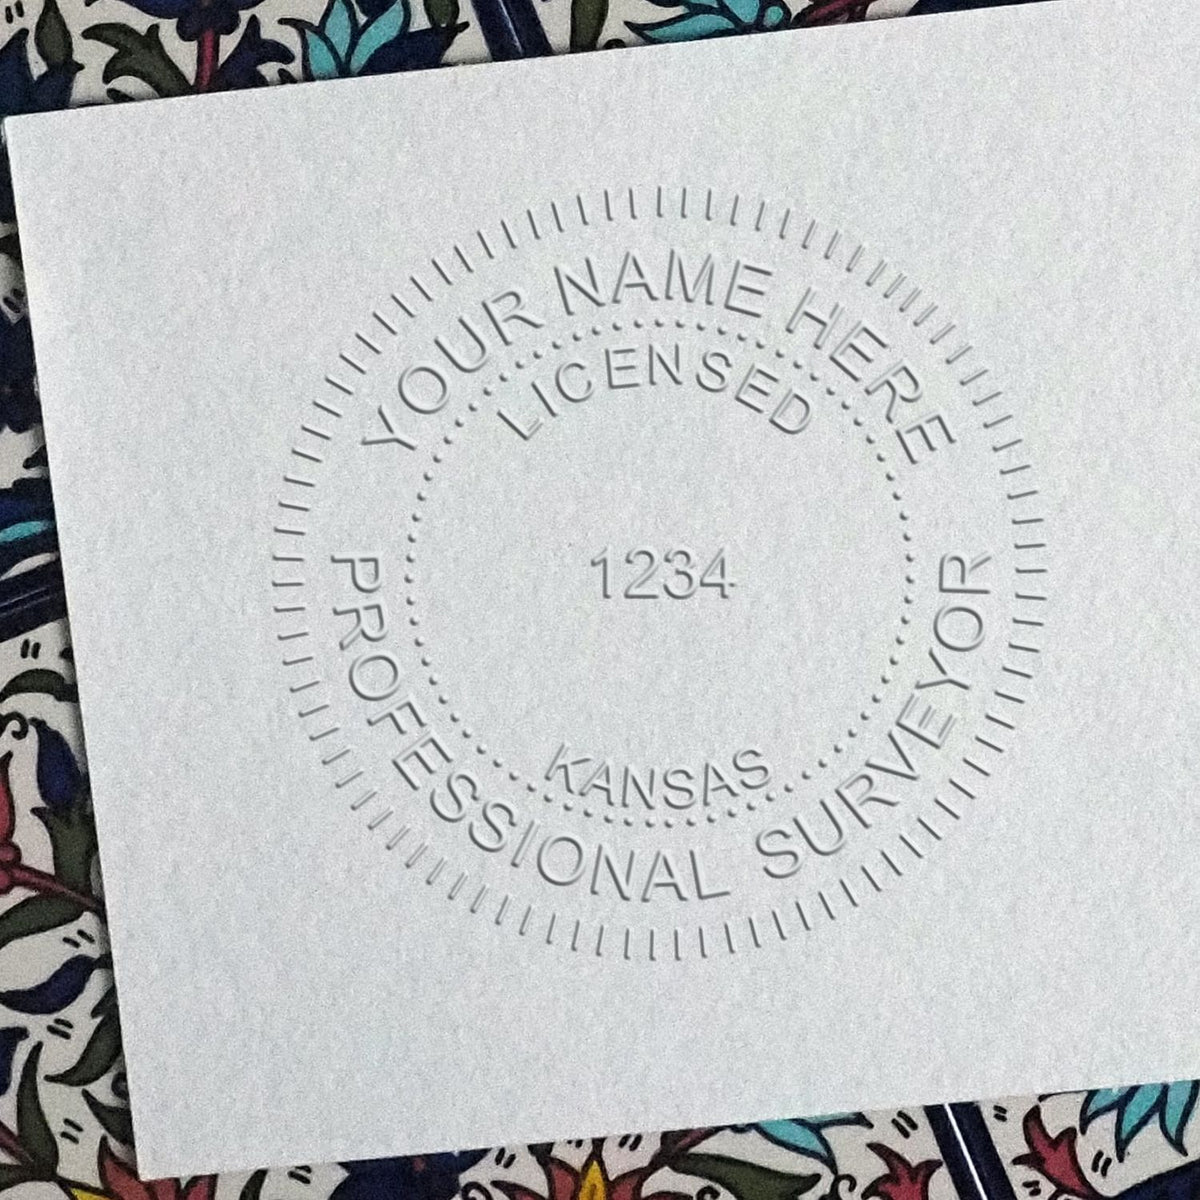 An alternative view of the Heavy Duty Cast Iron Kansas Land Surveyor Seal Embosser stamped on a sheet of paper showing the image in use